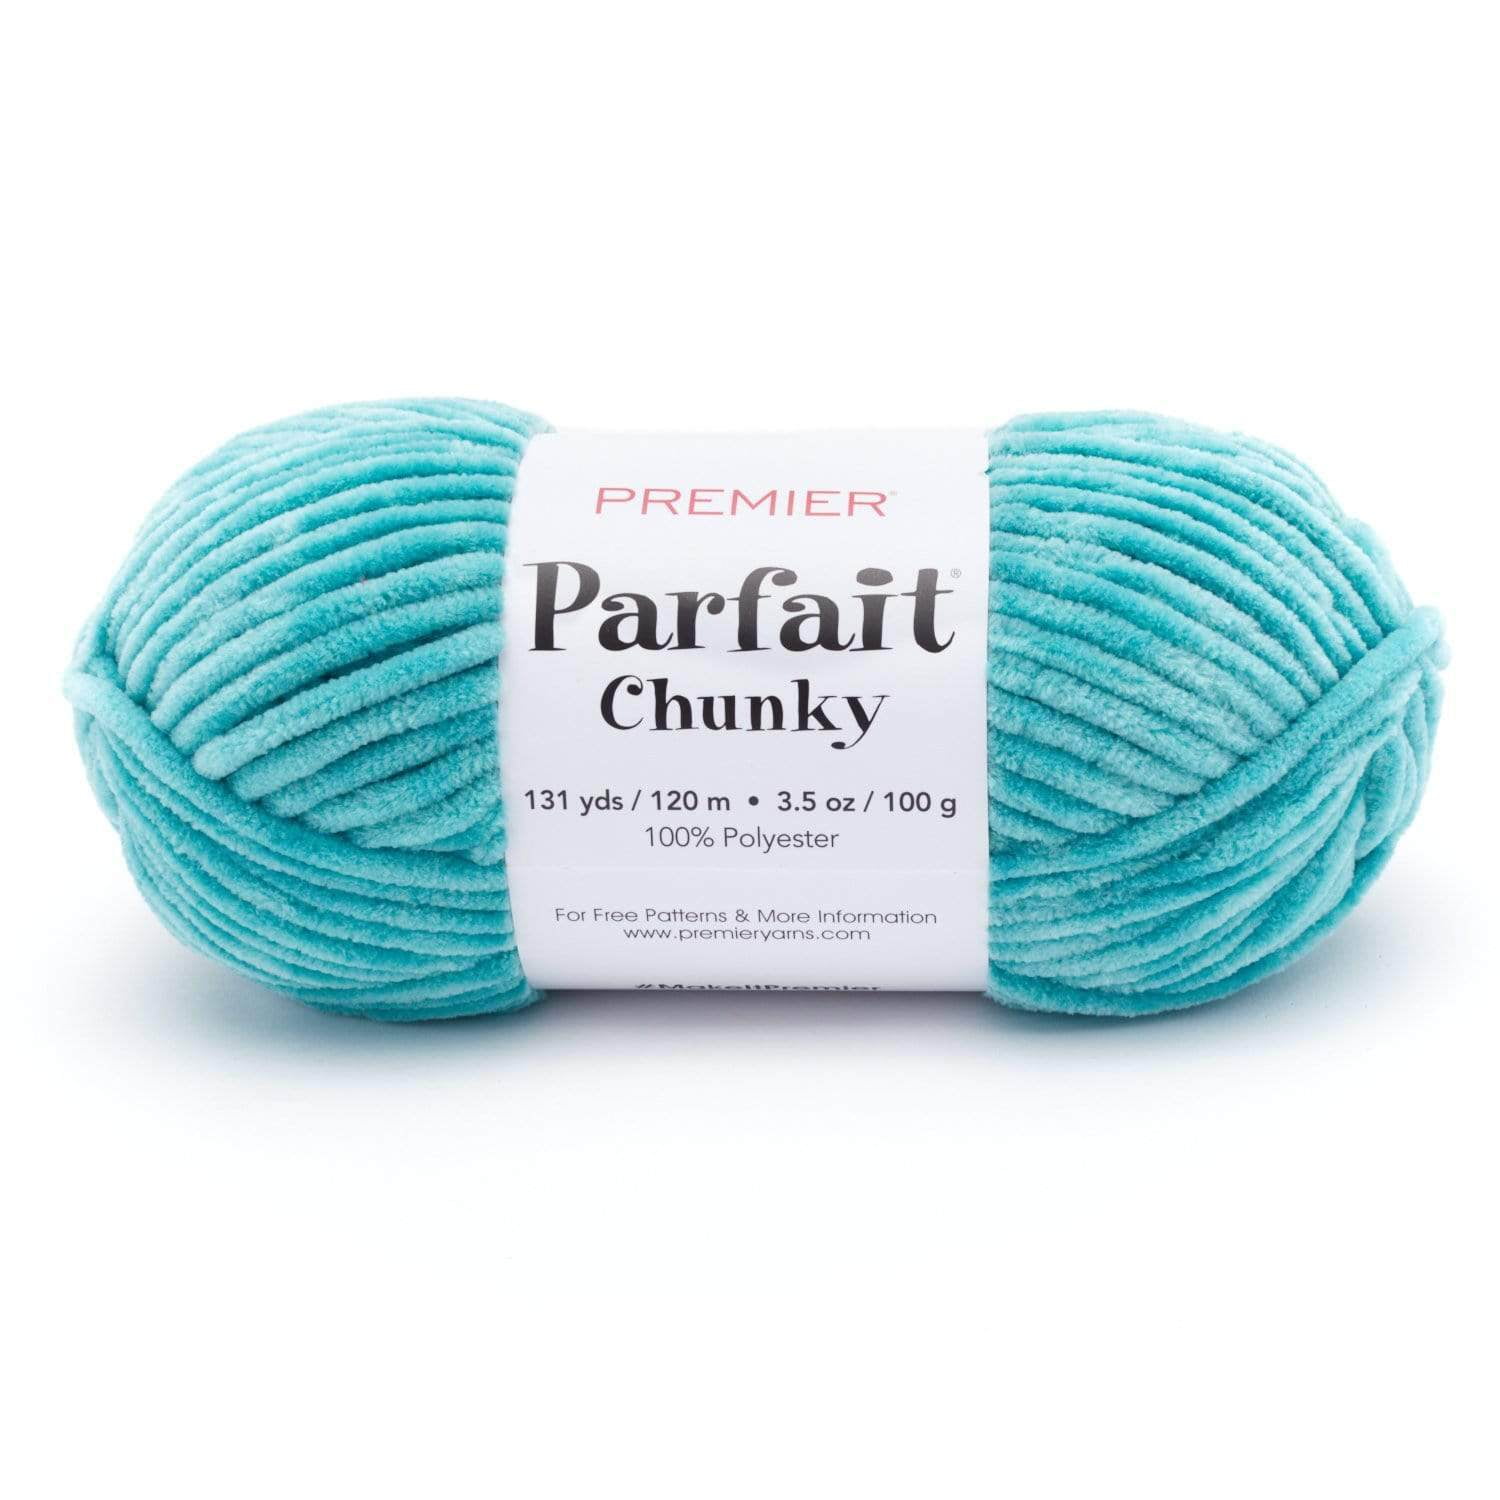 Premier Parfait Chunky - Ballet Pink — Angie and Britt